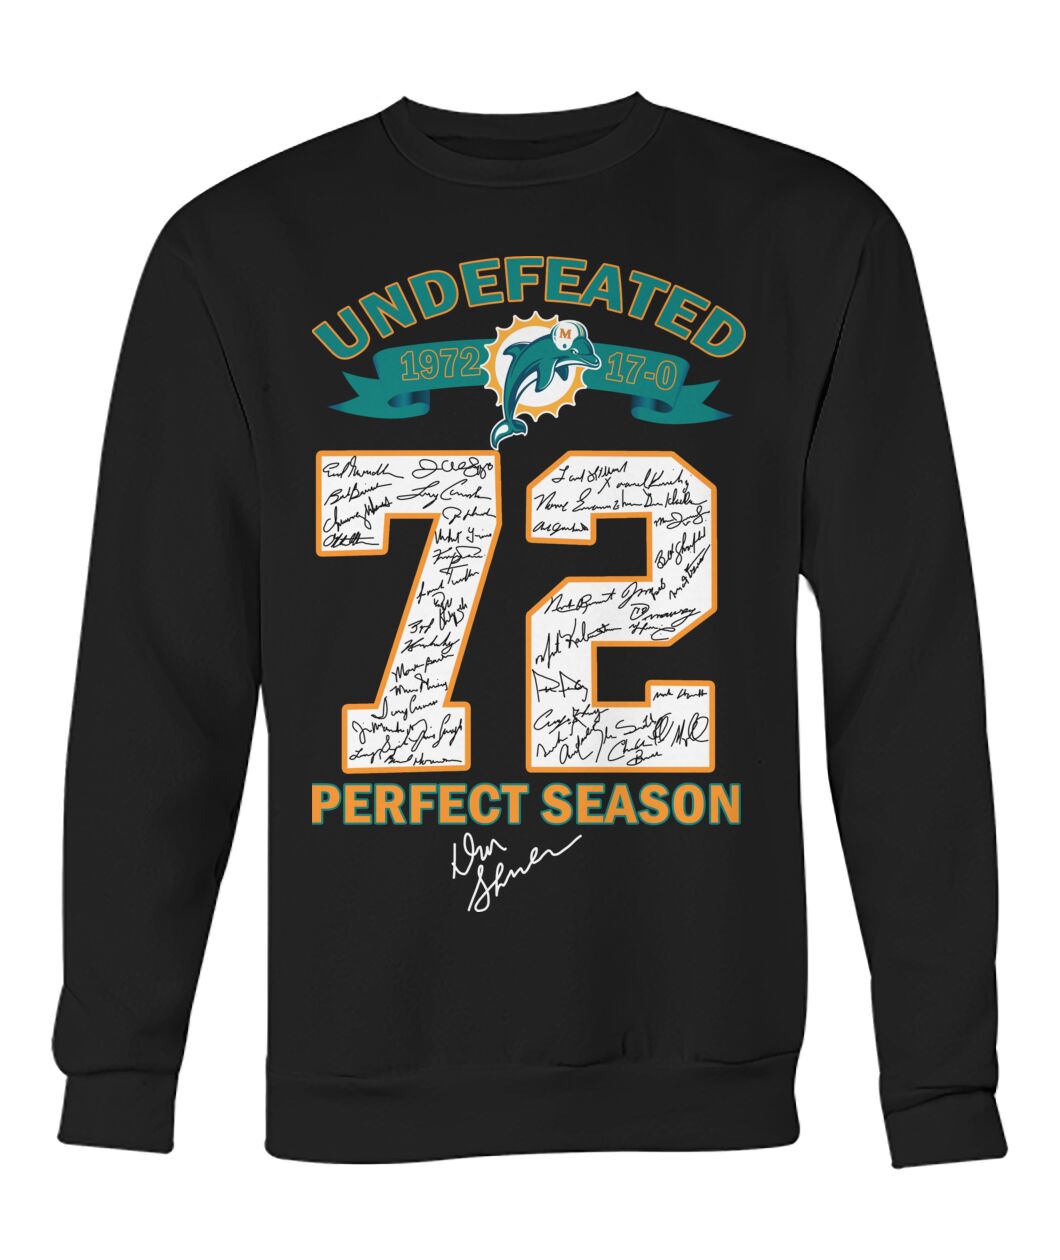 Miami Dolphins Undefeated 72 perfect season shirt 12